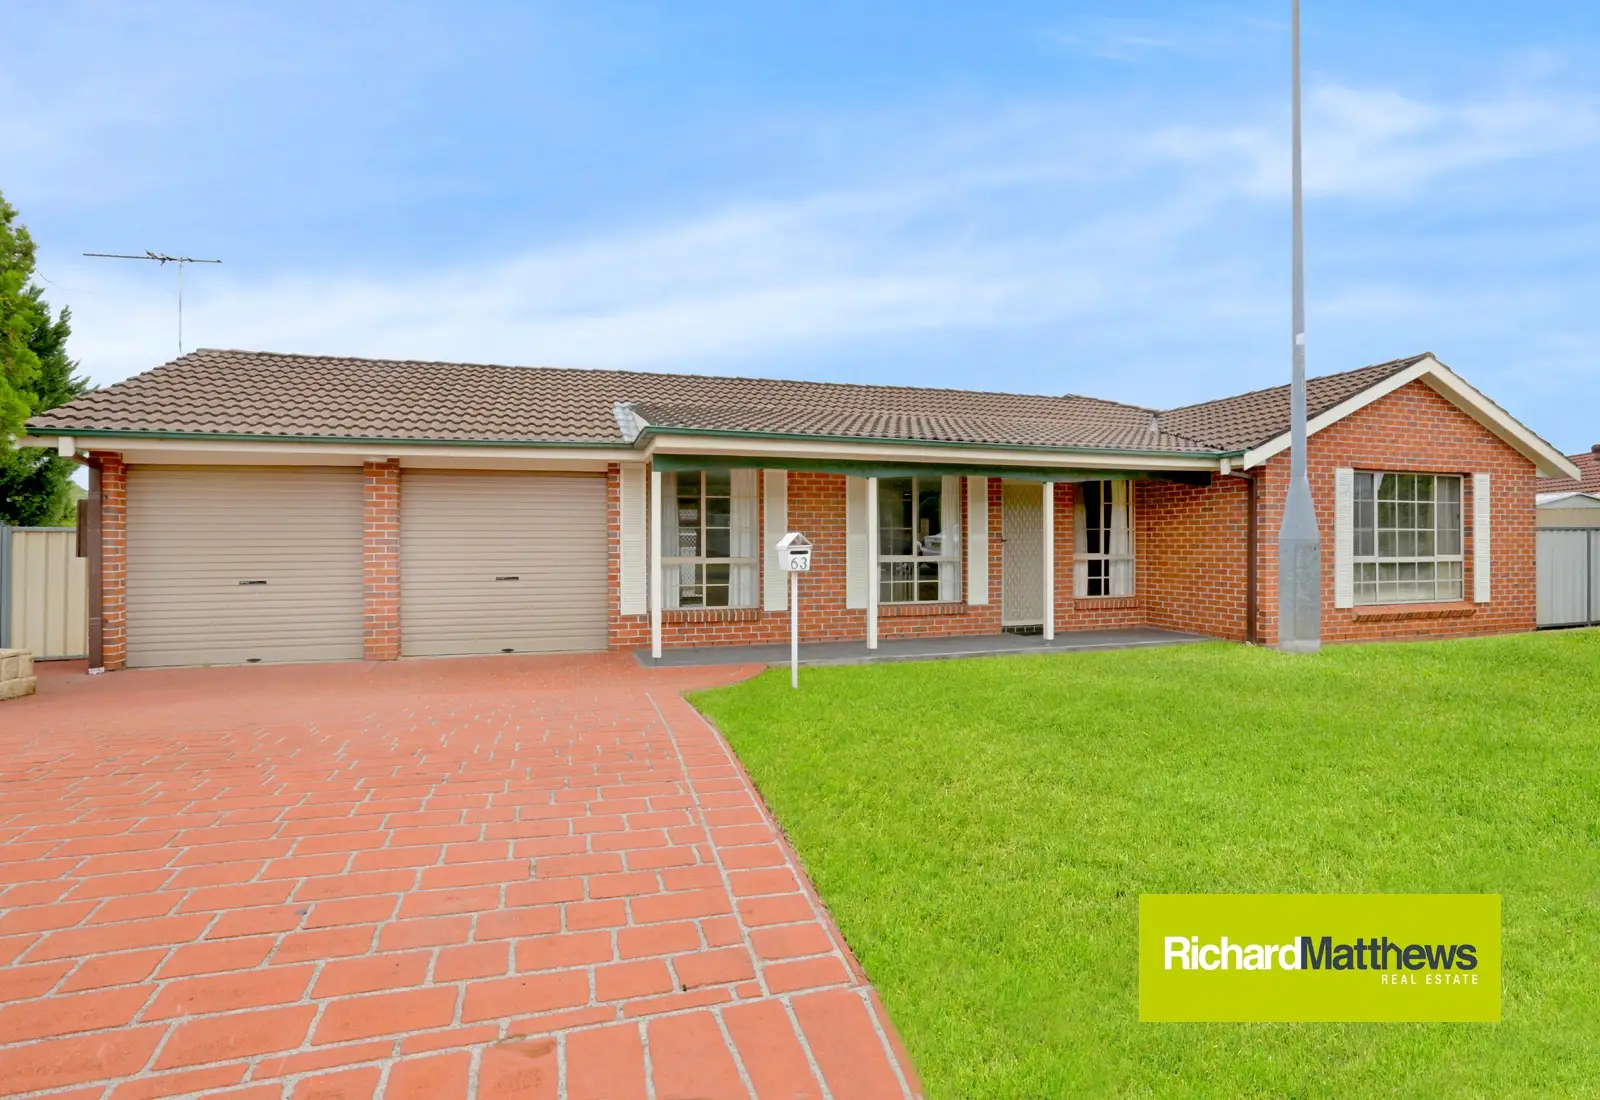 63 Epping Forest Drive, Kearns Leased by Richard Matthews Real Estate - image 1